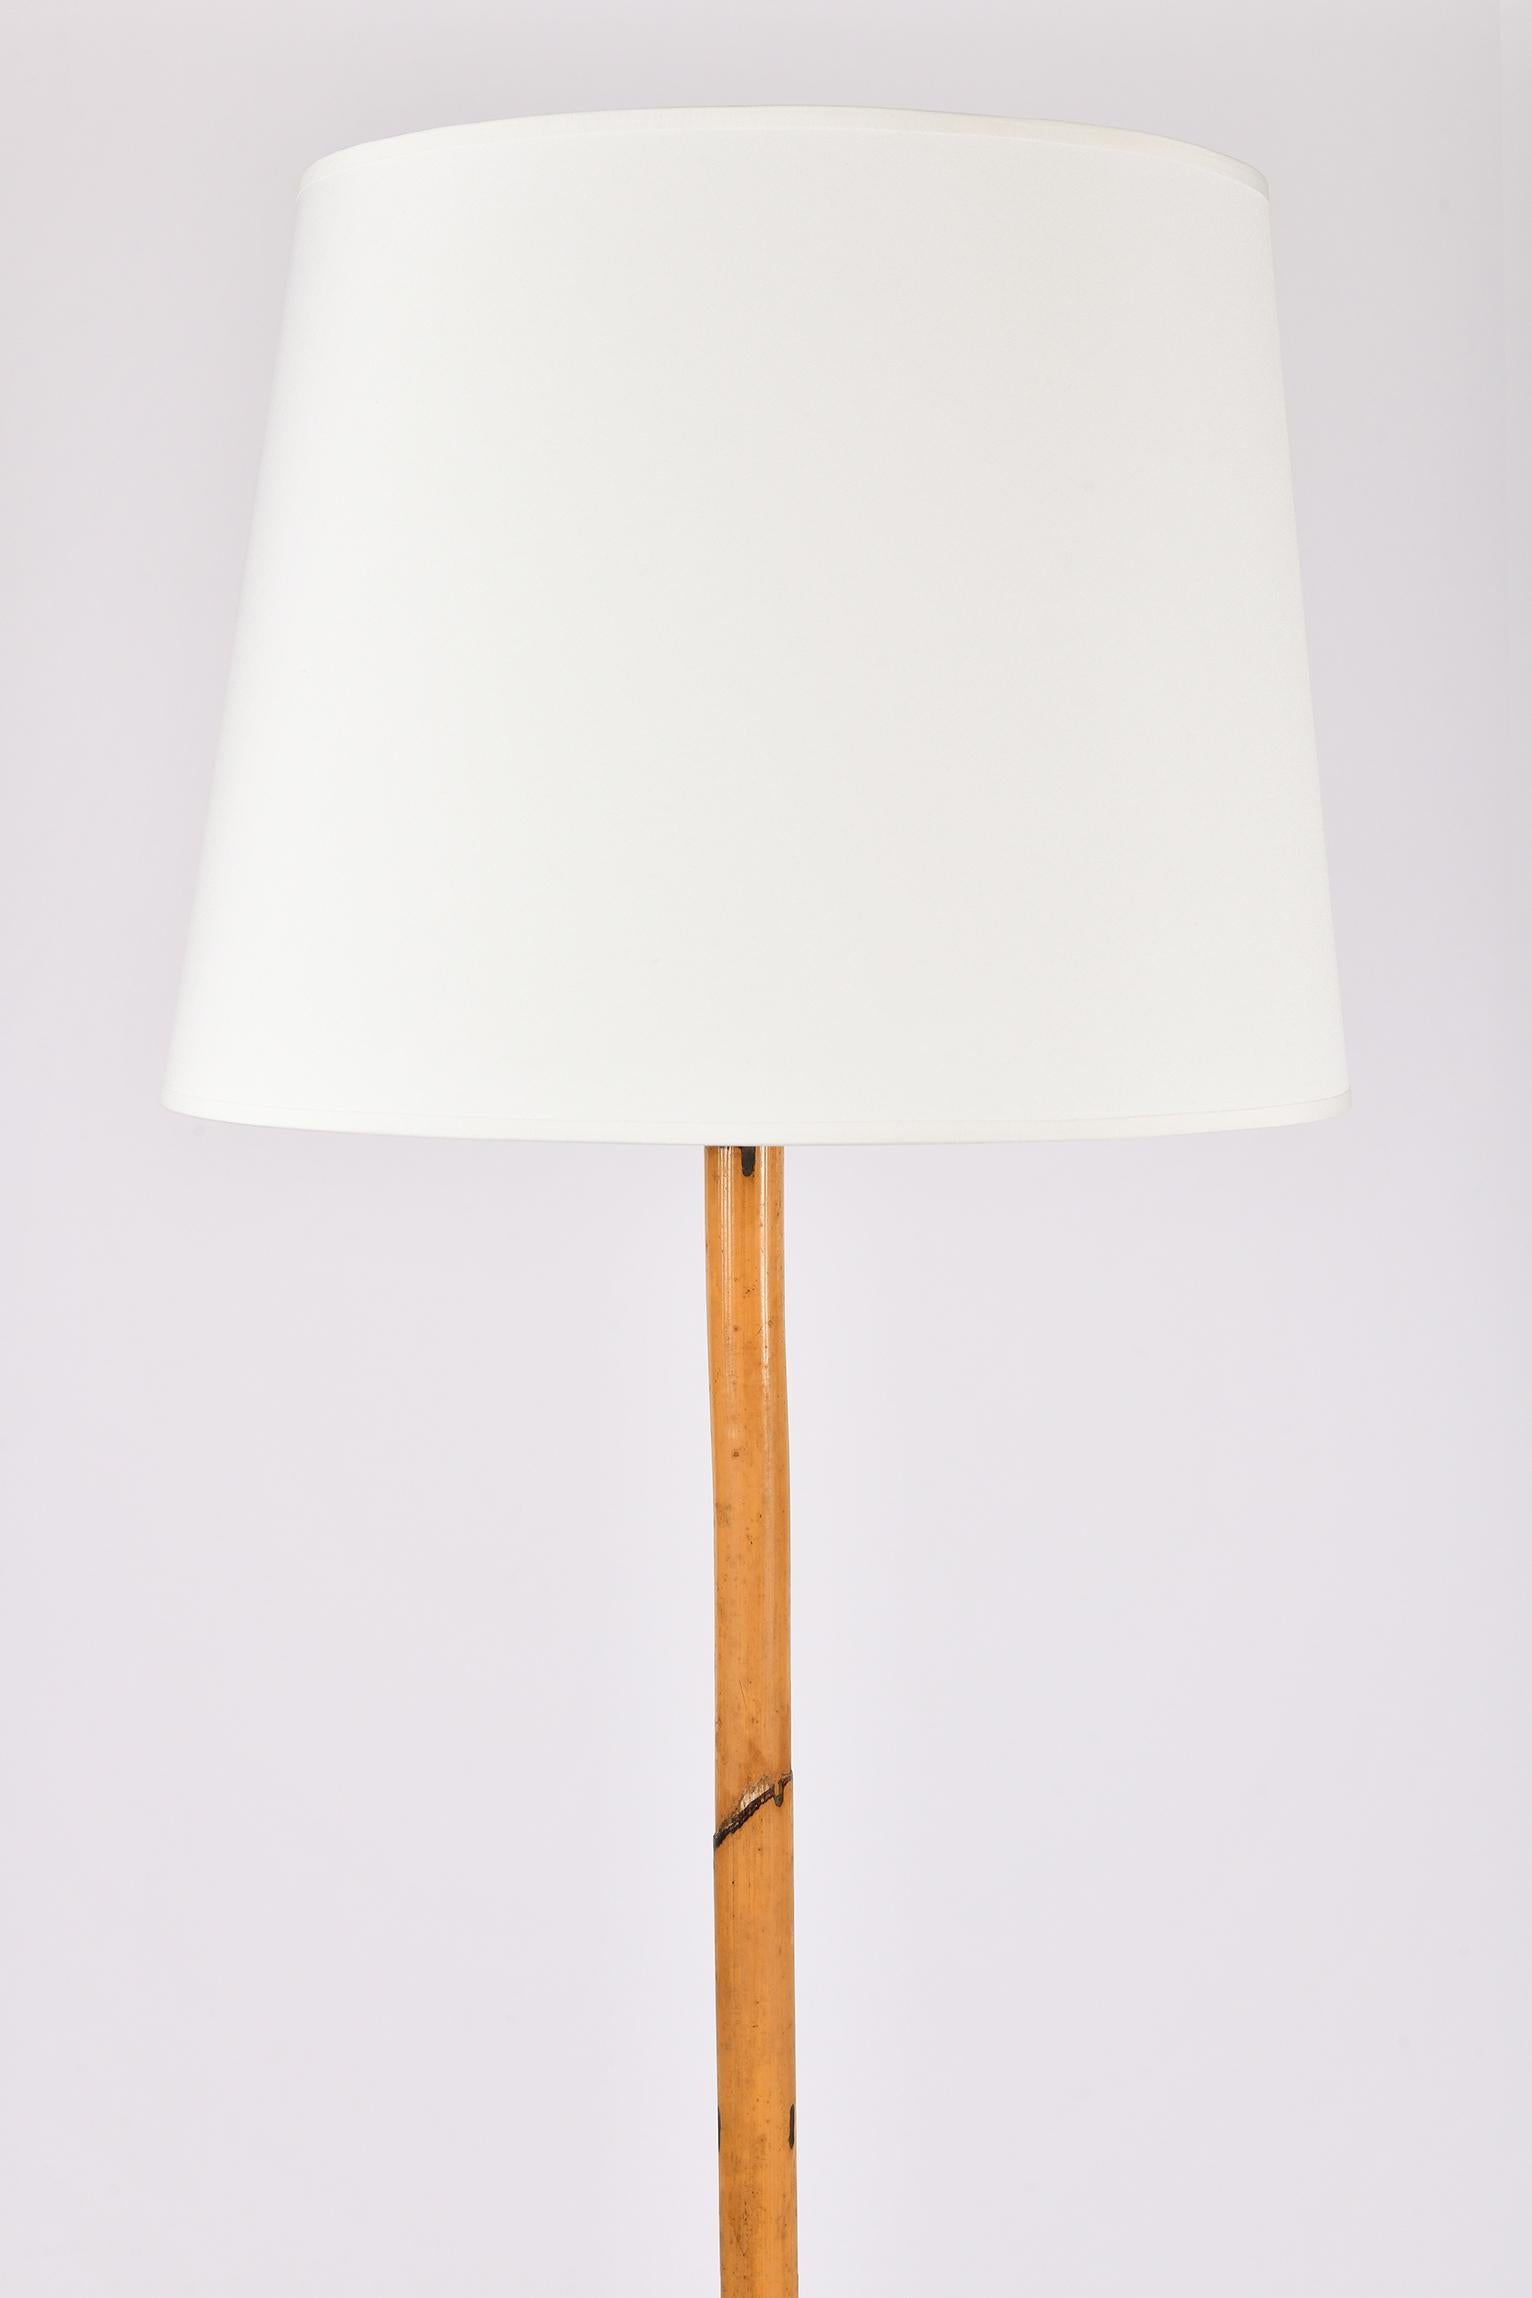 French 1950s Bamboo Floor Lamp